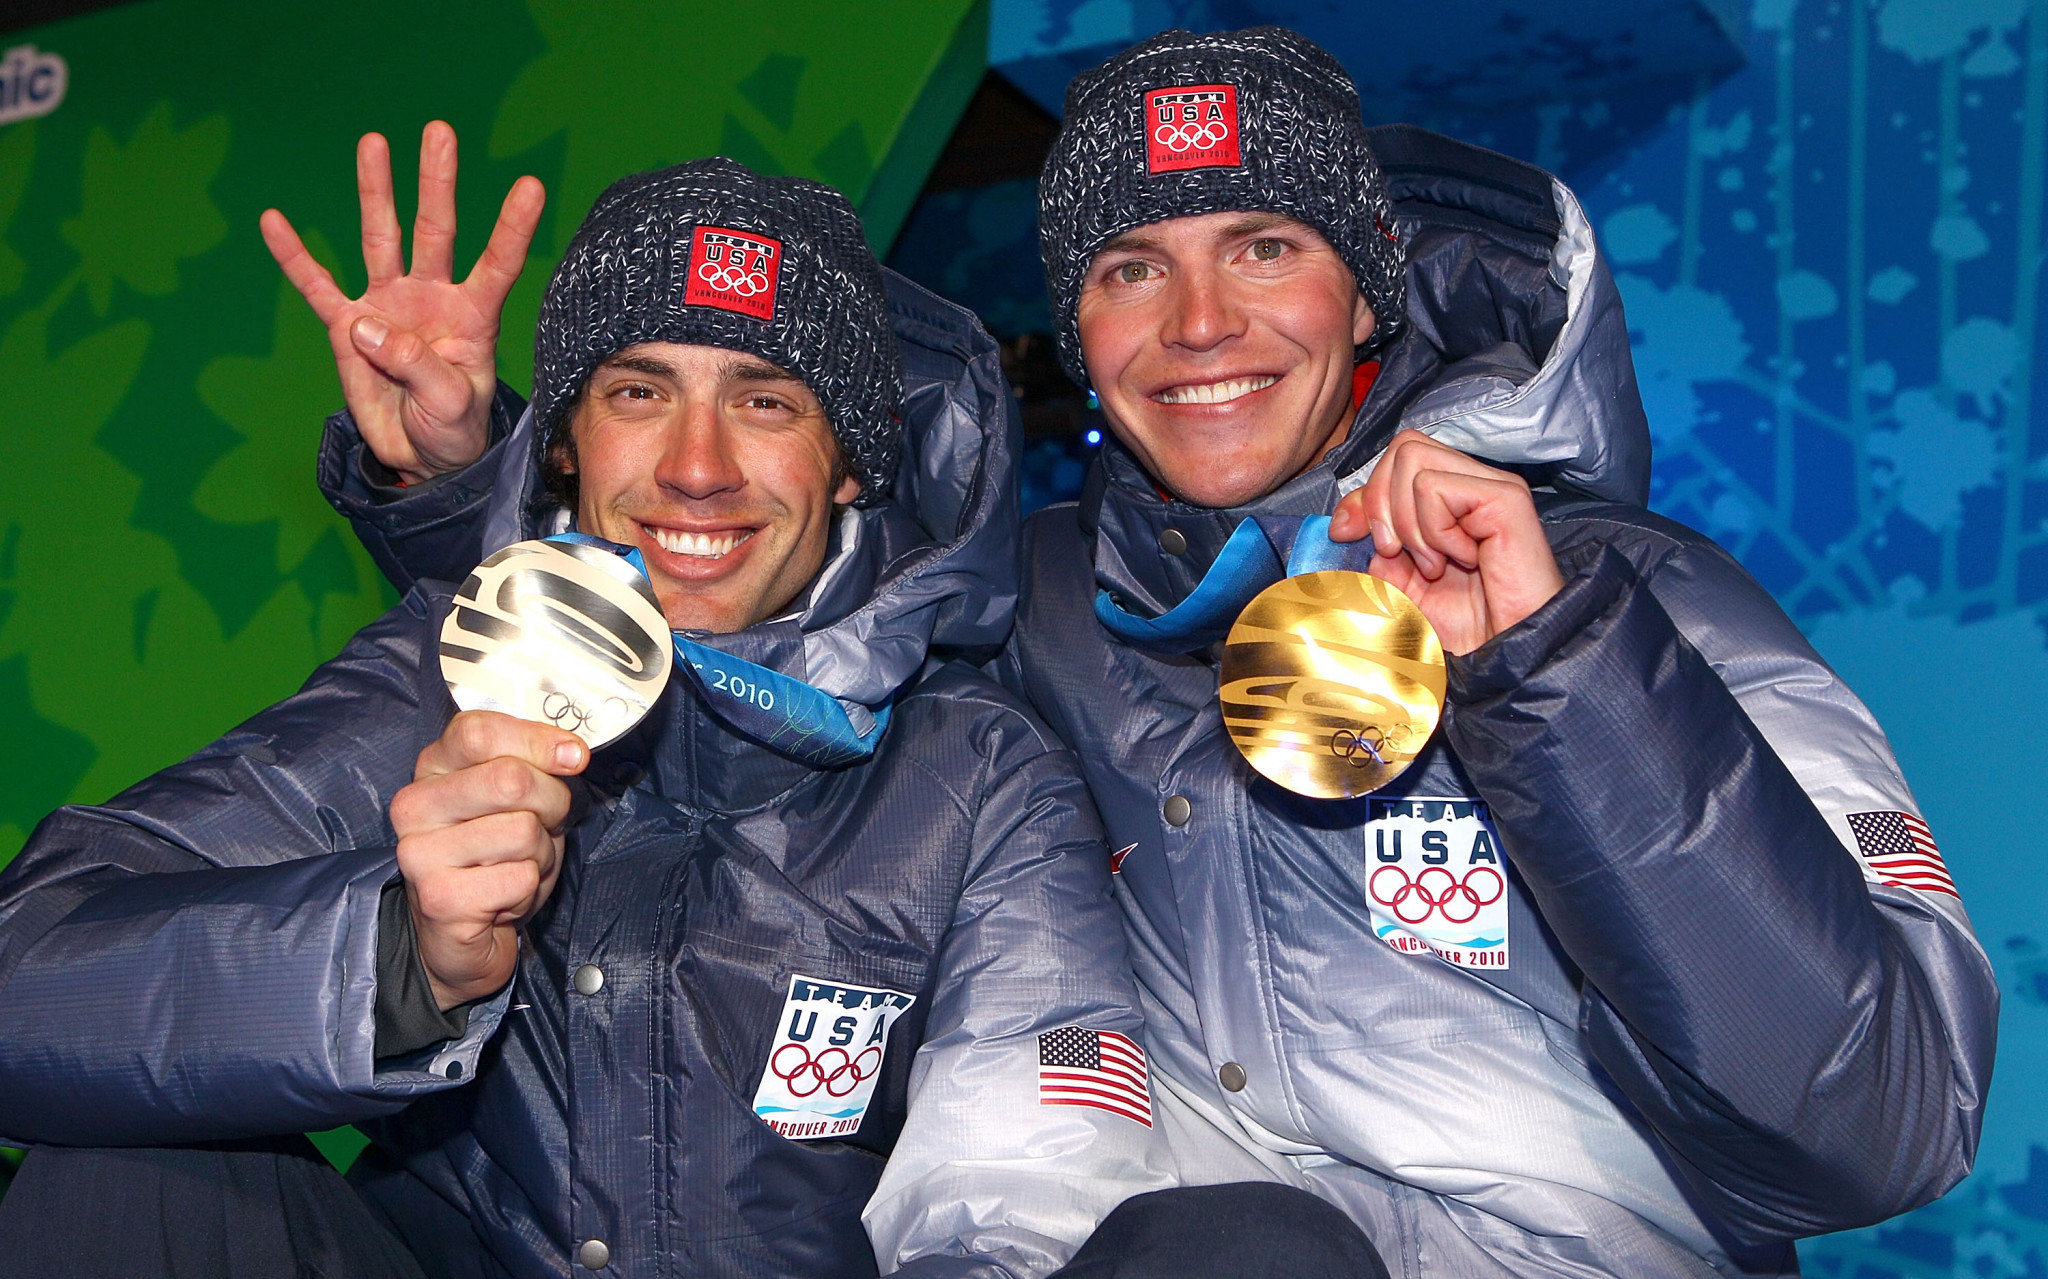 The United States have won four Olympic medals in Nordic combined - all at Vancouver 2010 when Billy Demong, right, and Johnny Spillane, left, won gold and silver in the large hill/10km event ©Getty Images